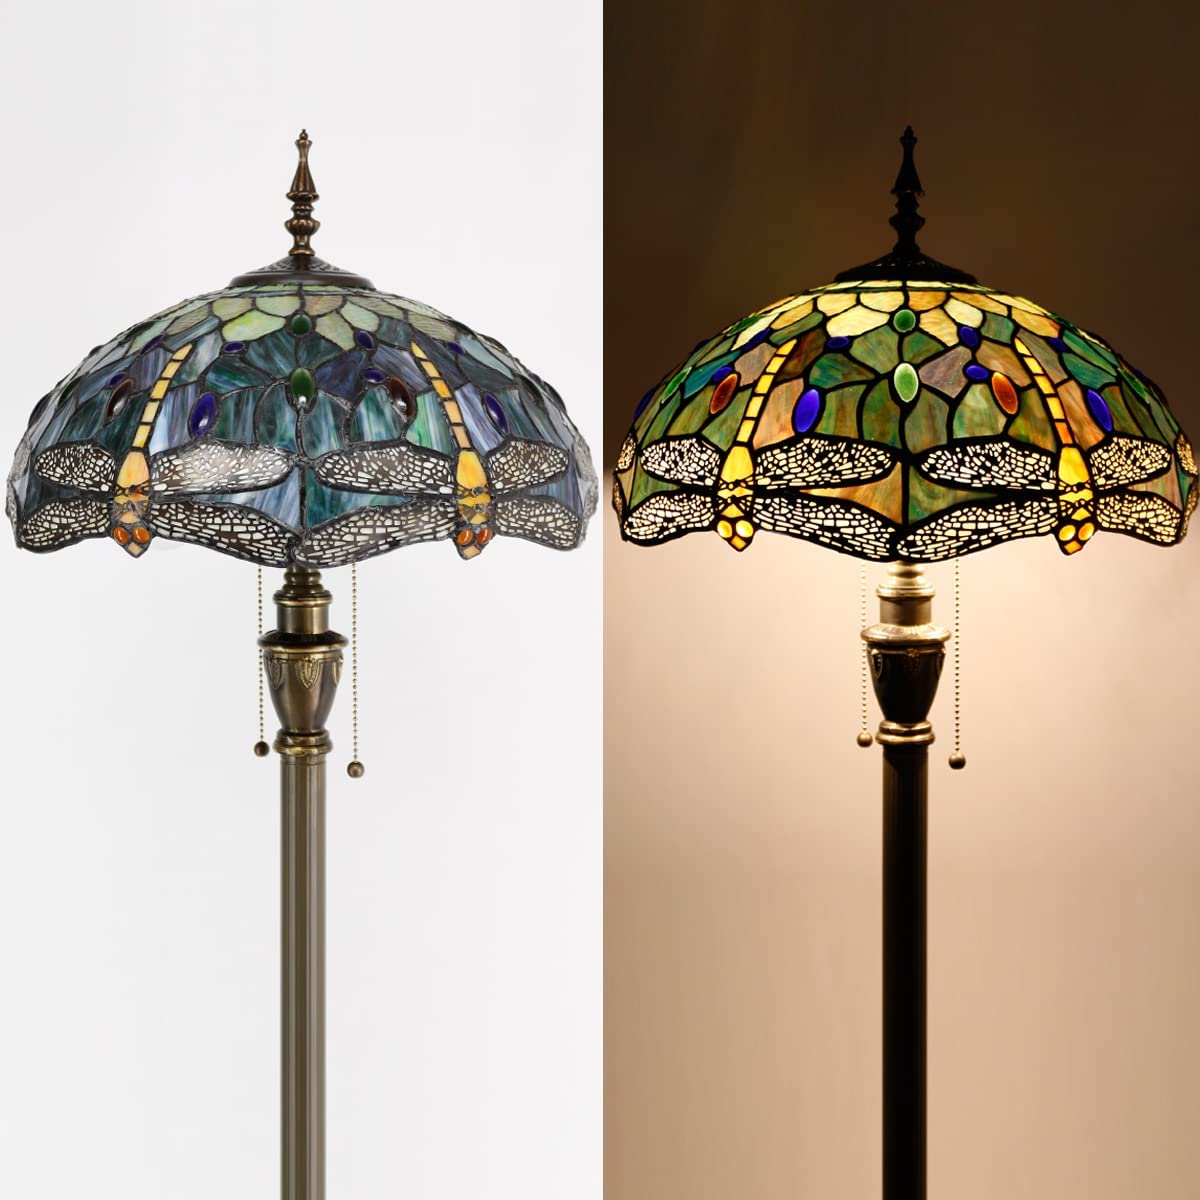 BBNBDMZ  Floor Lamp Stained Glass Dragonfly Style Reading Lamp W16H70 Inch Tall Antique Standing Pole Light Bronze Finsh  Bright Lighting Decor  Corner Living Room Bedroom Office